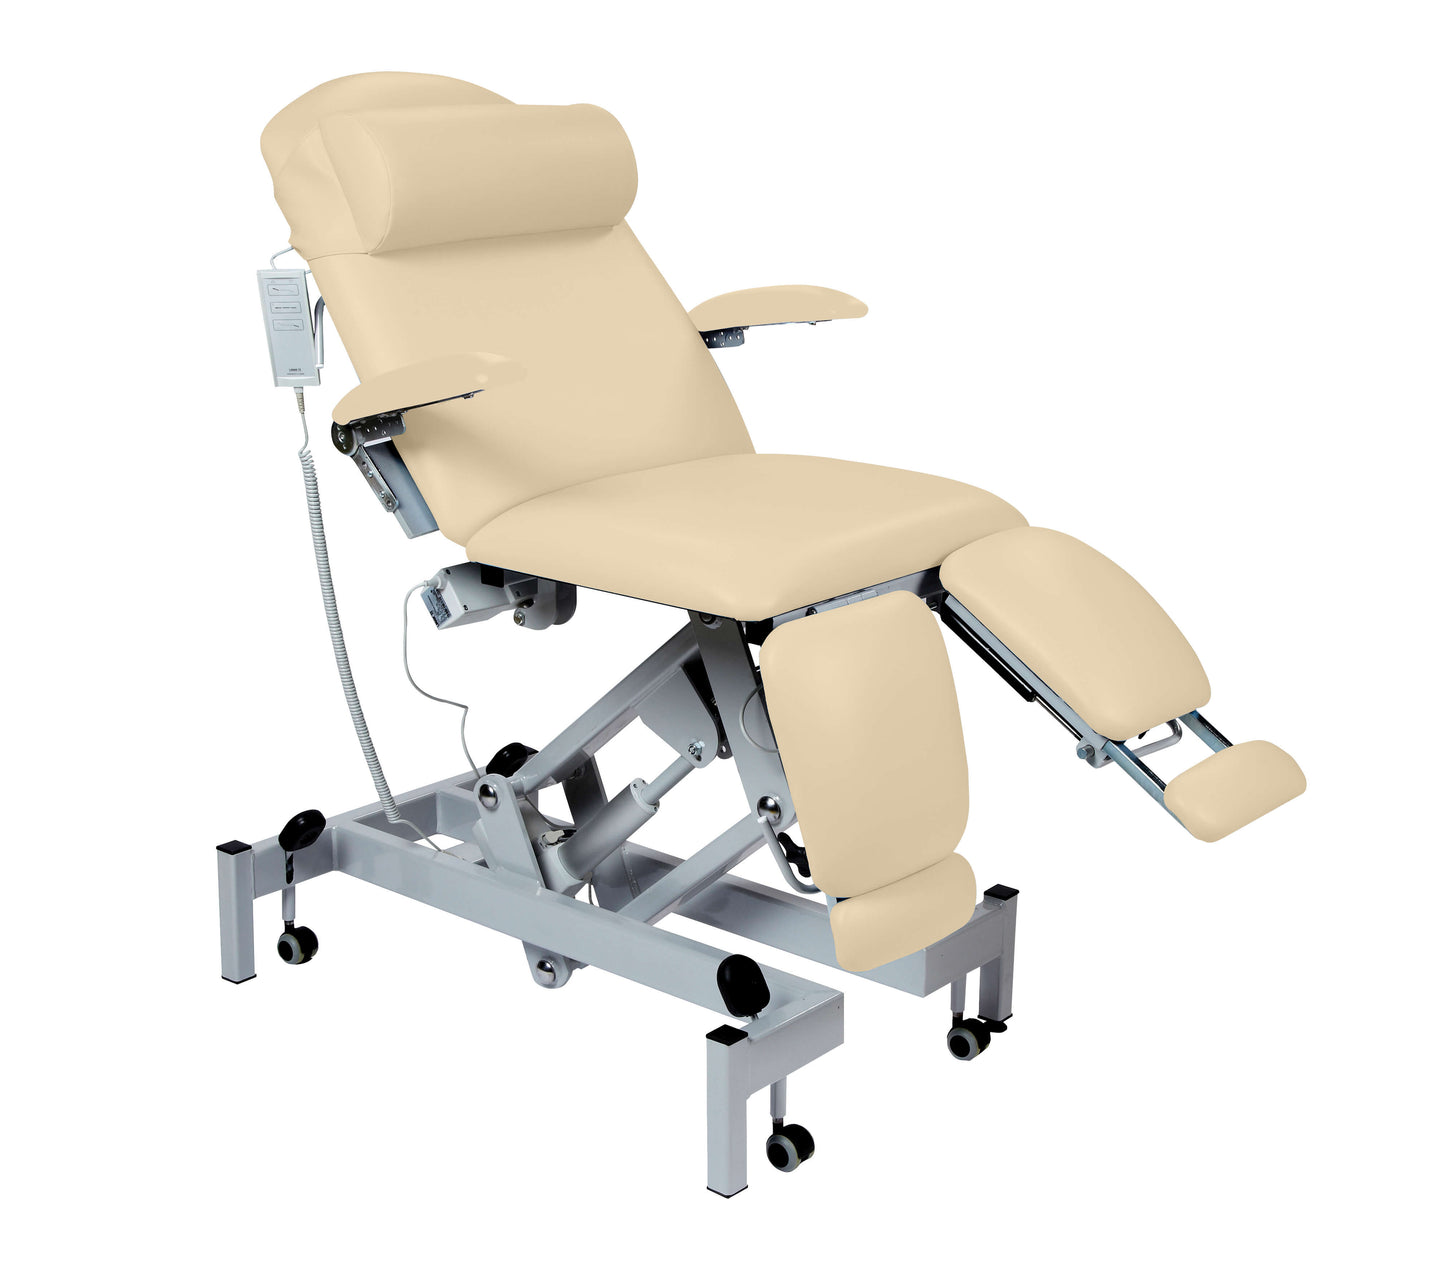 Sunflower - Fusion Podiatry Chair - Electric 2